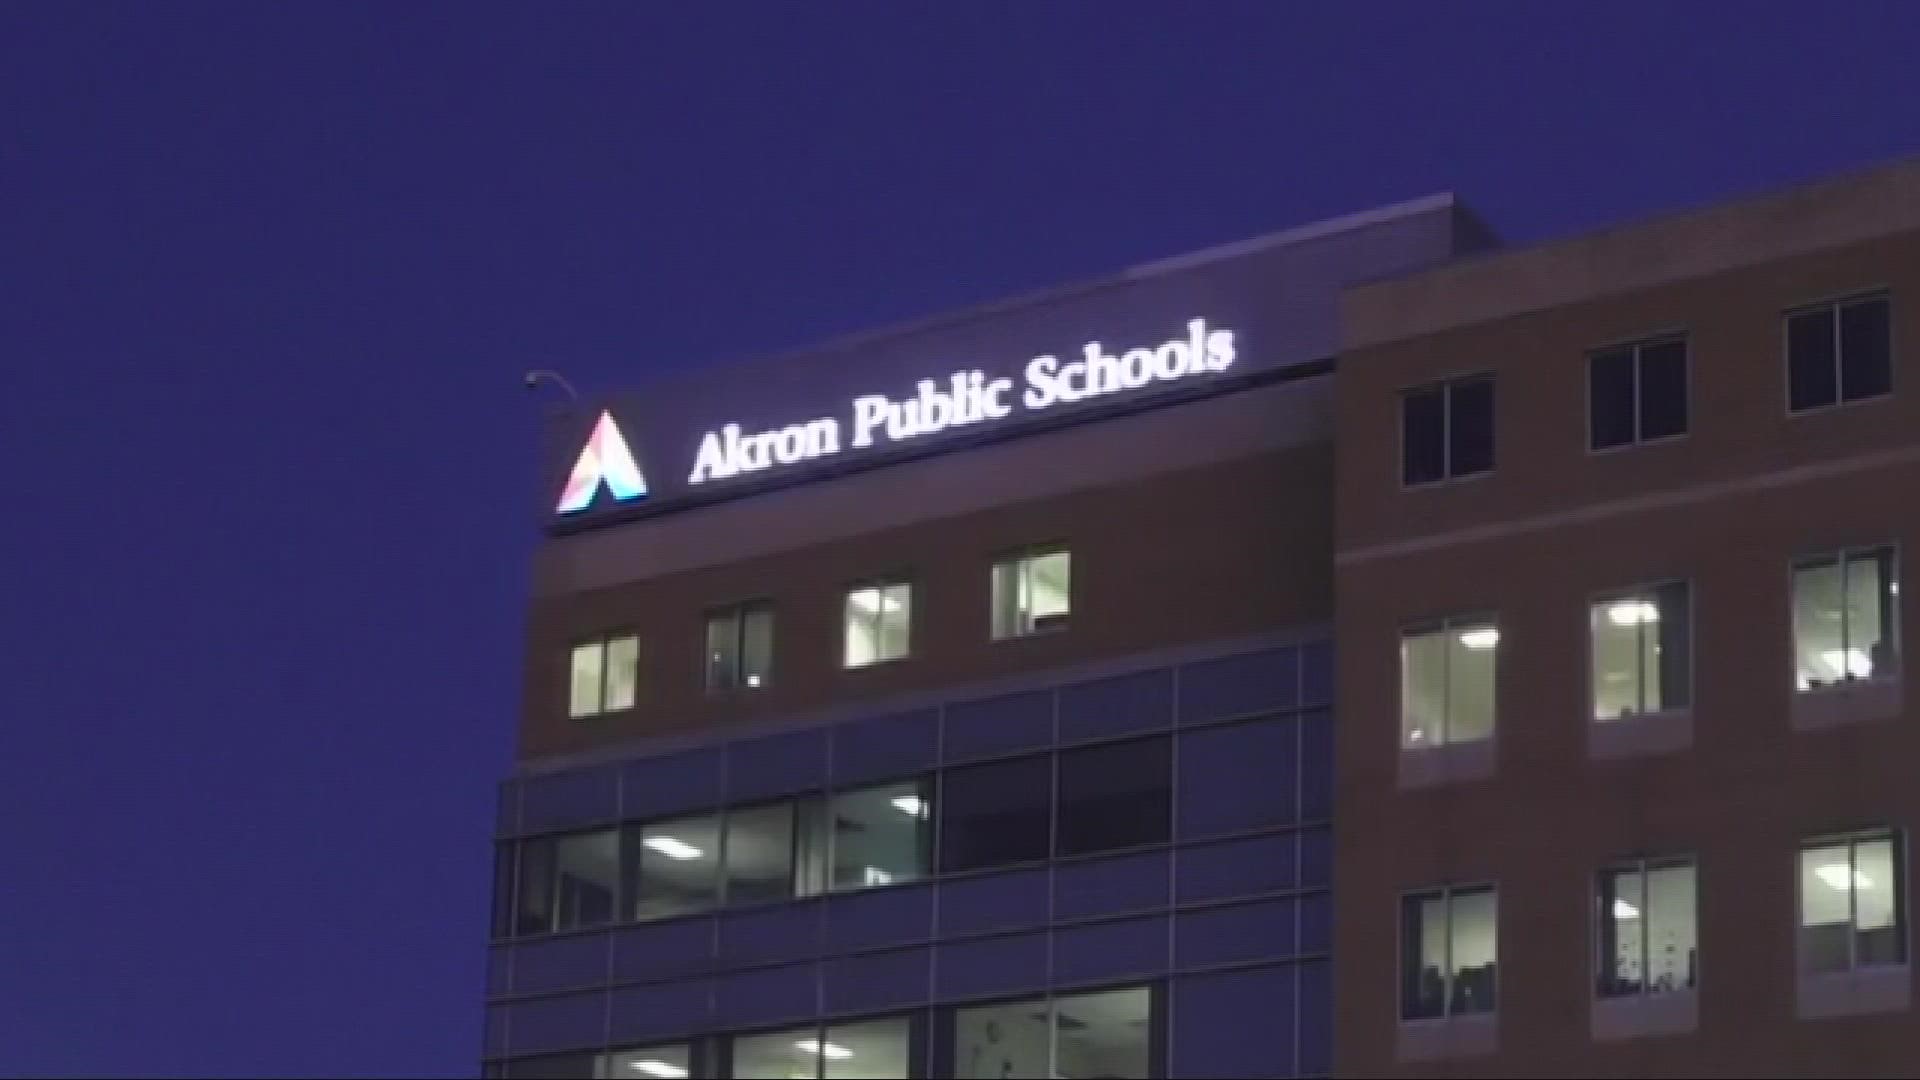 'Through their vote, Akron educators sent a strong and unified message that they will continue to put student and staff safety first.'